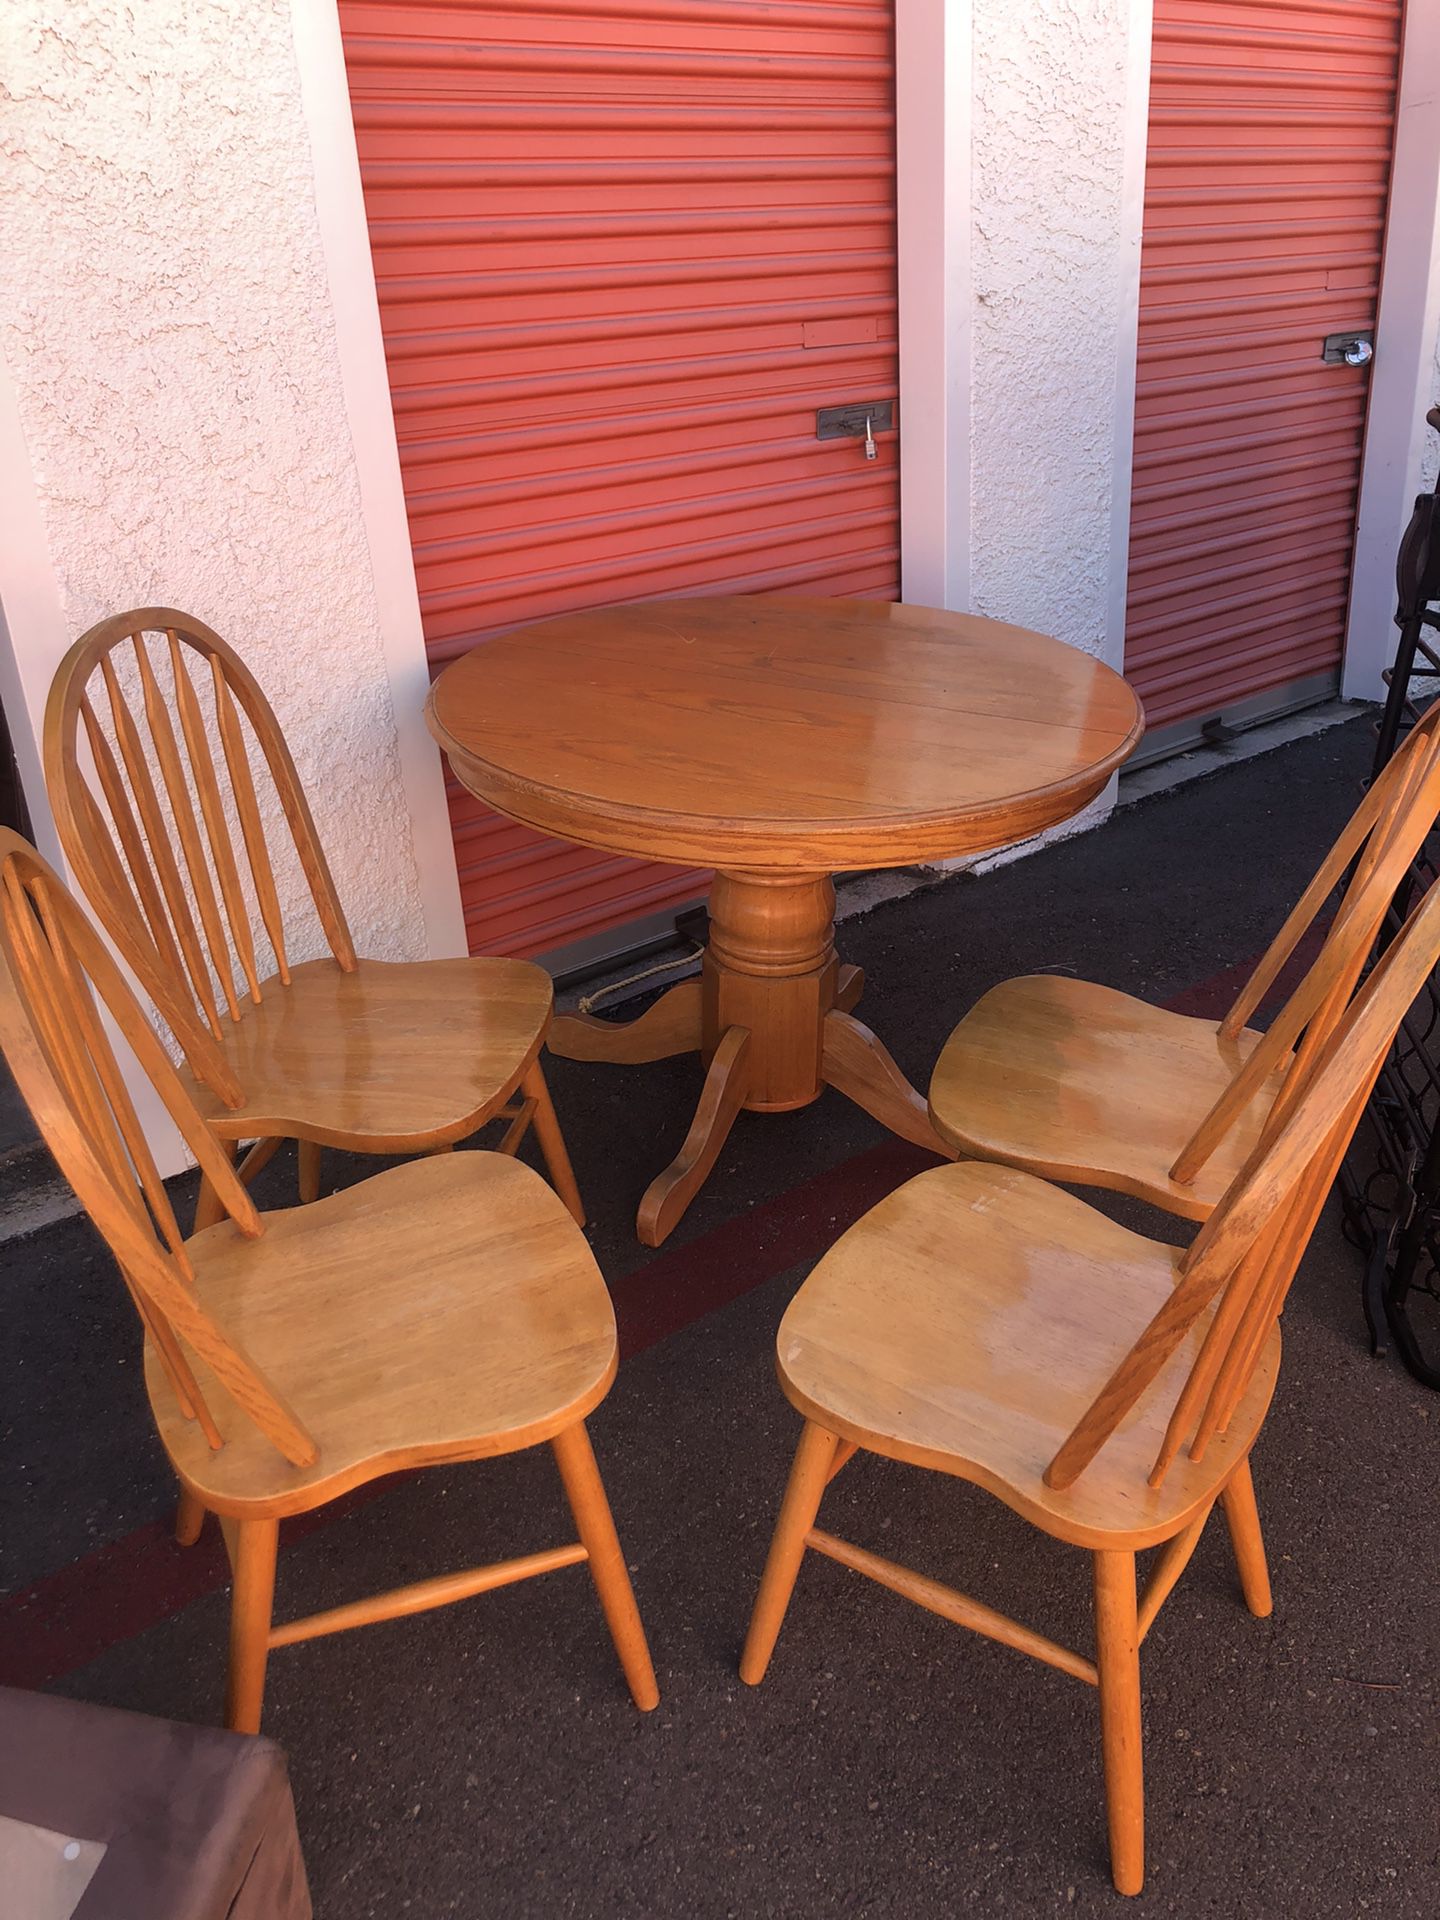 Wood table and four (4) chairs